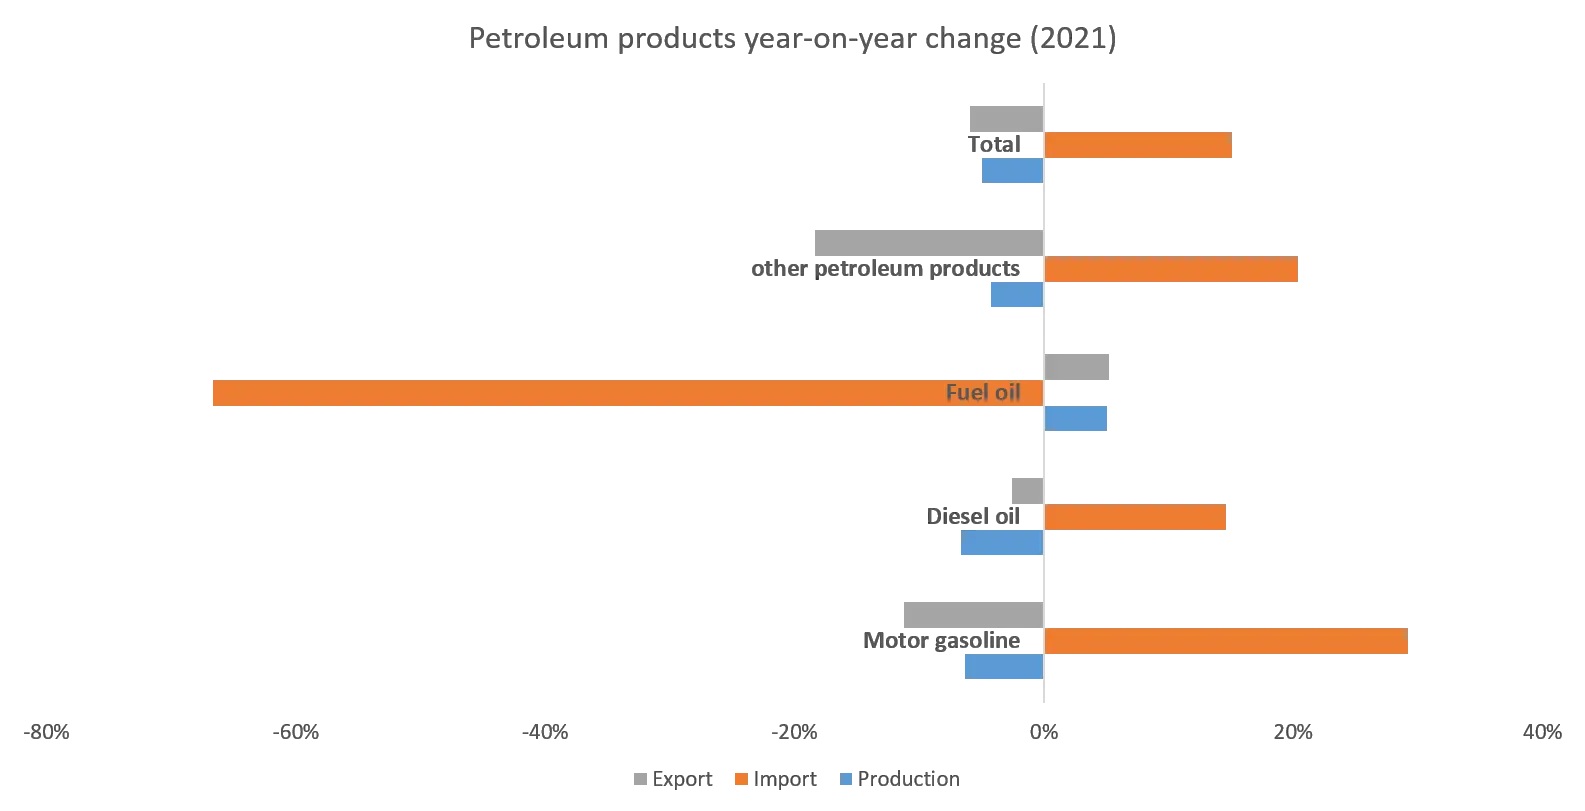 Petroleum_products_year-on-year_change_2021.png